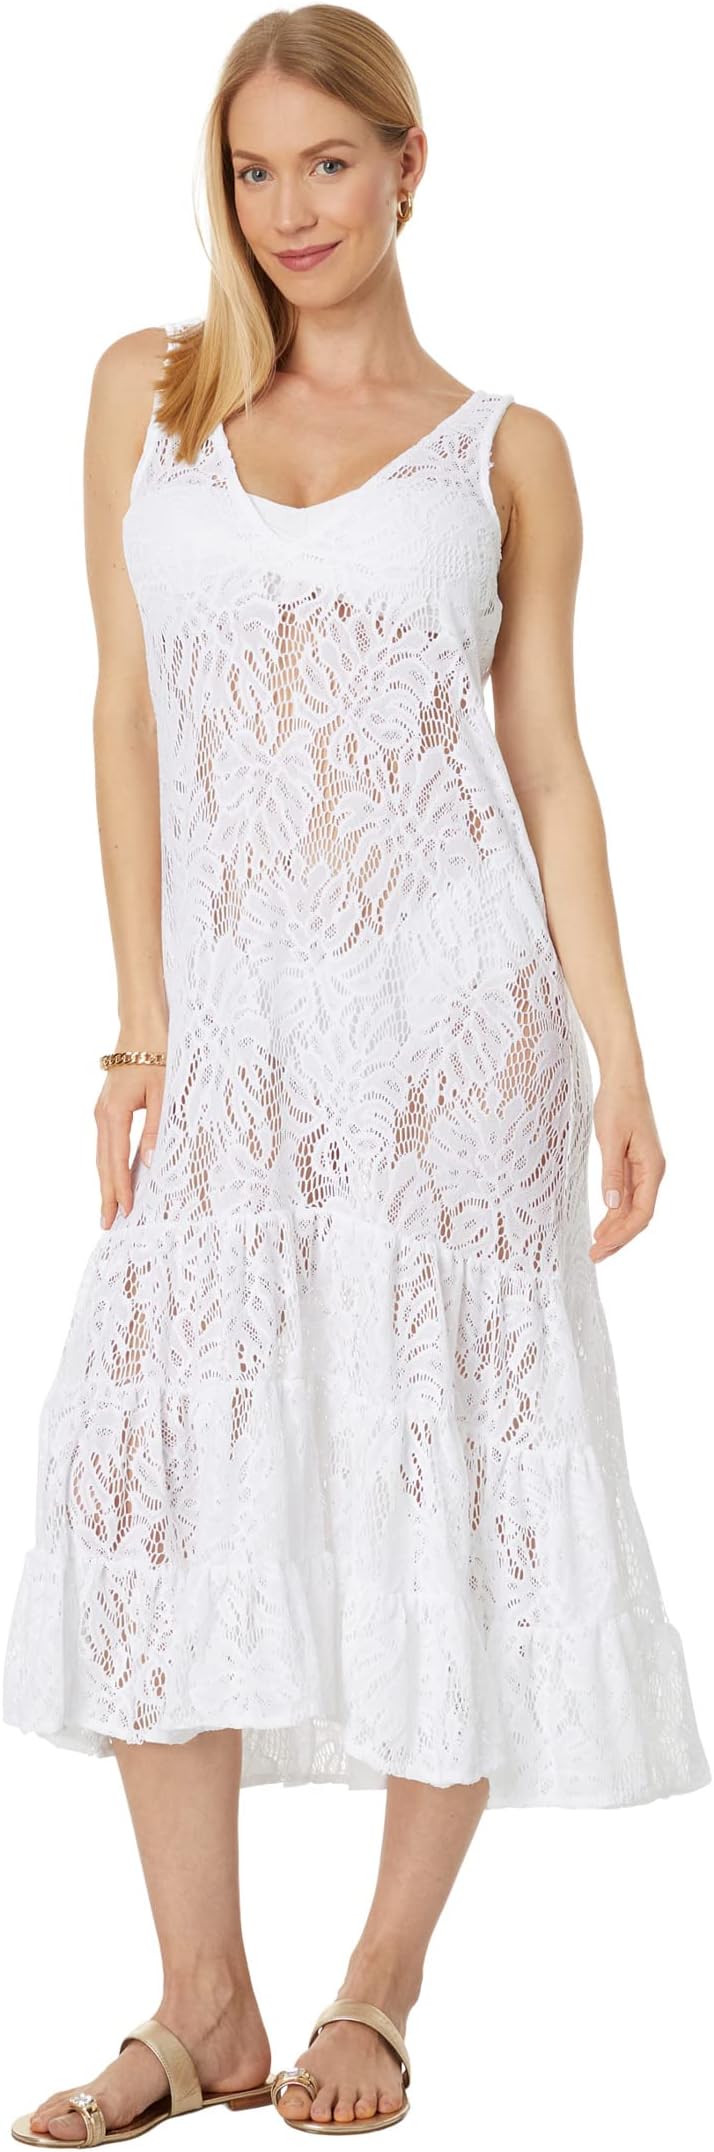 Накидка Finnley Lace Cover-Up Lilly Pulitzer, цвет Resort White Paradise Found Lace paradise beach resort